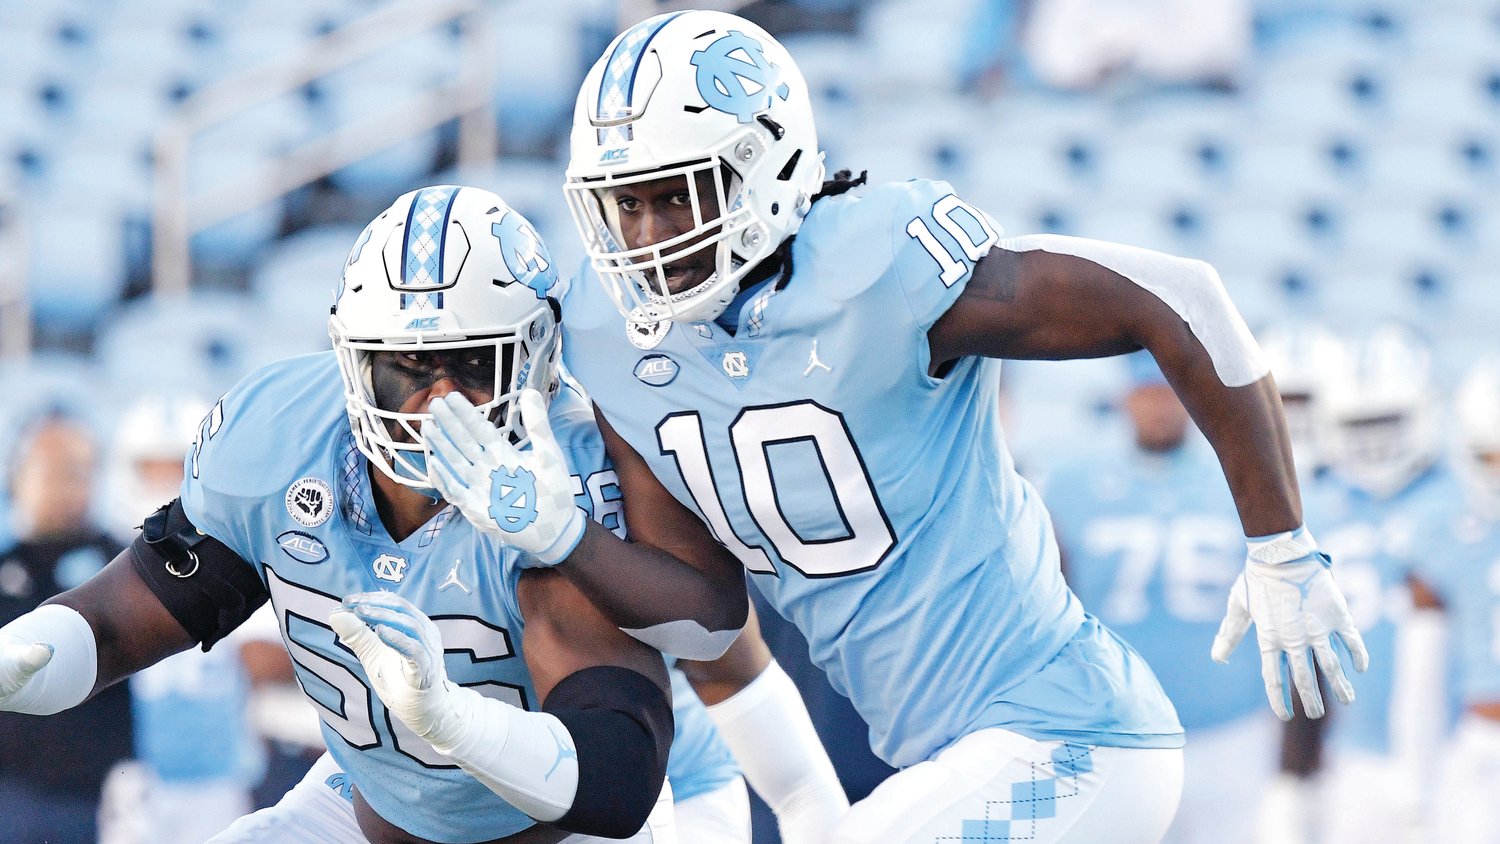 North Carolina's Desmond Evans (10) rushes the quarterback in a game against Notre Dame at Kenan Stadium in Chapel Hill on Nov. 27, 2020.